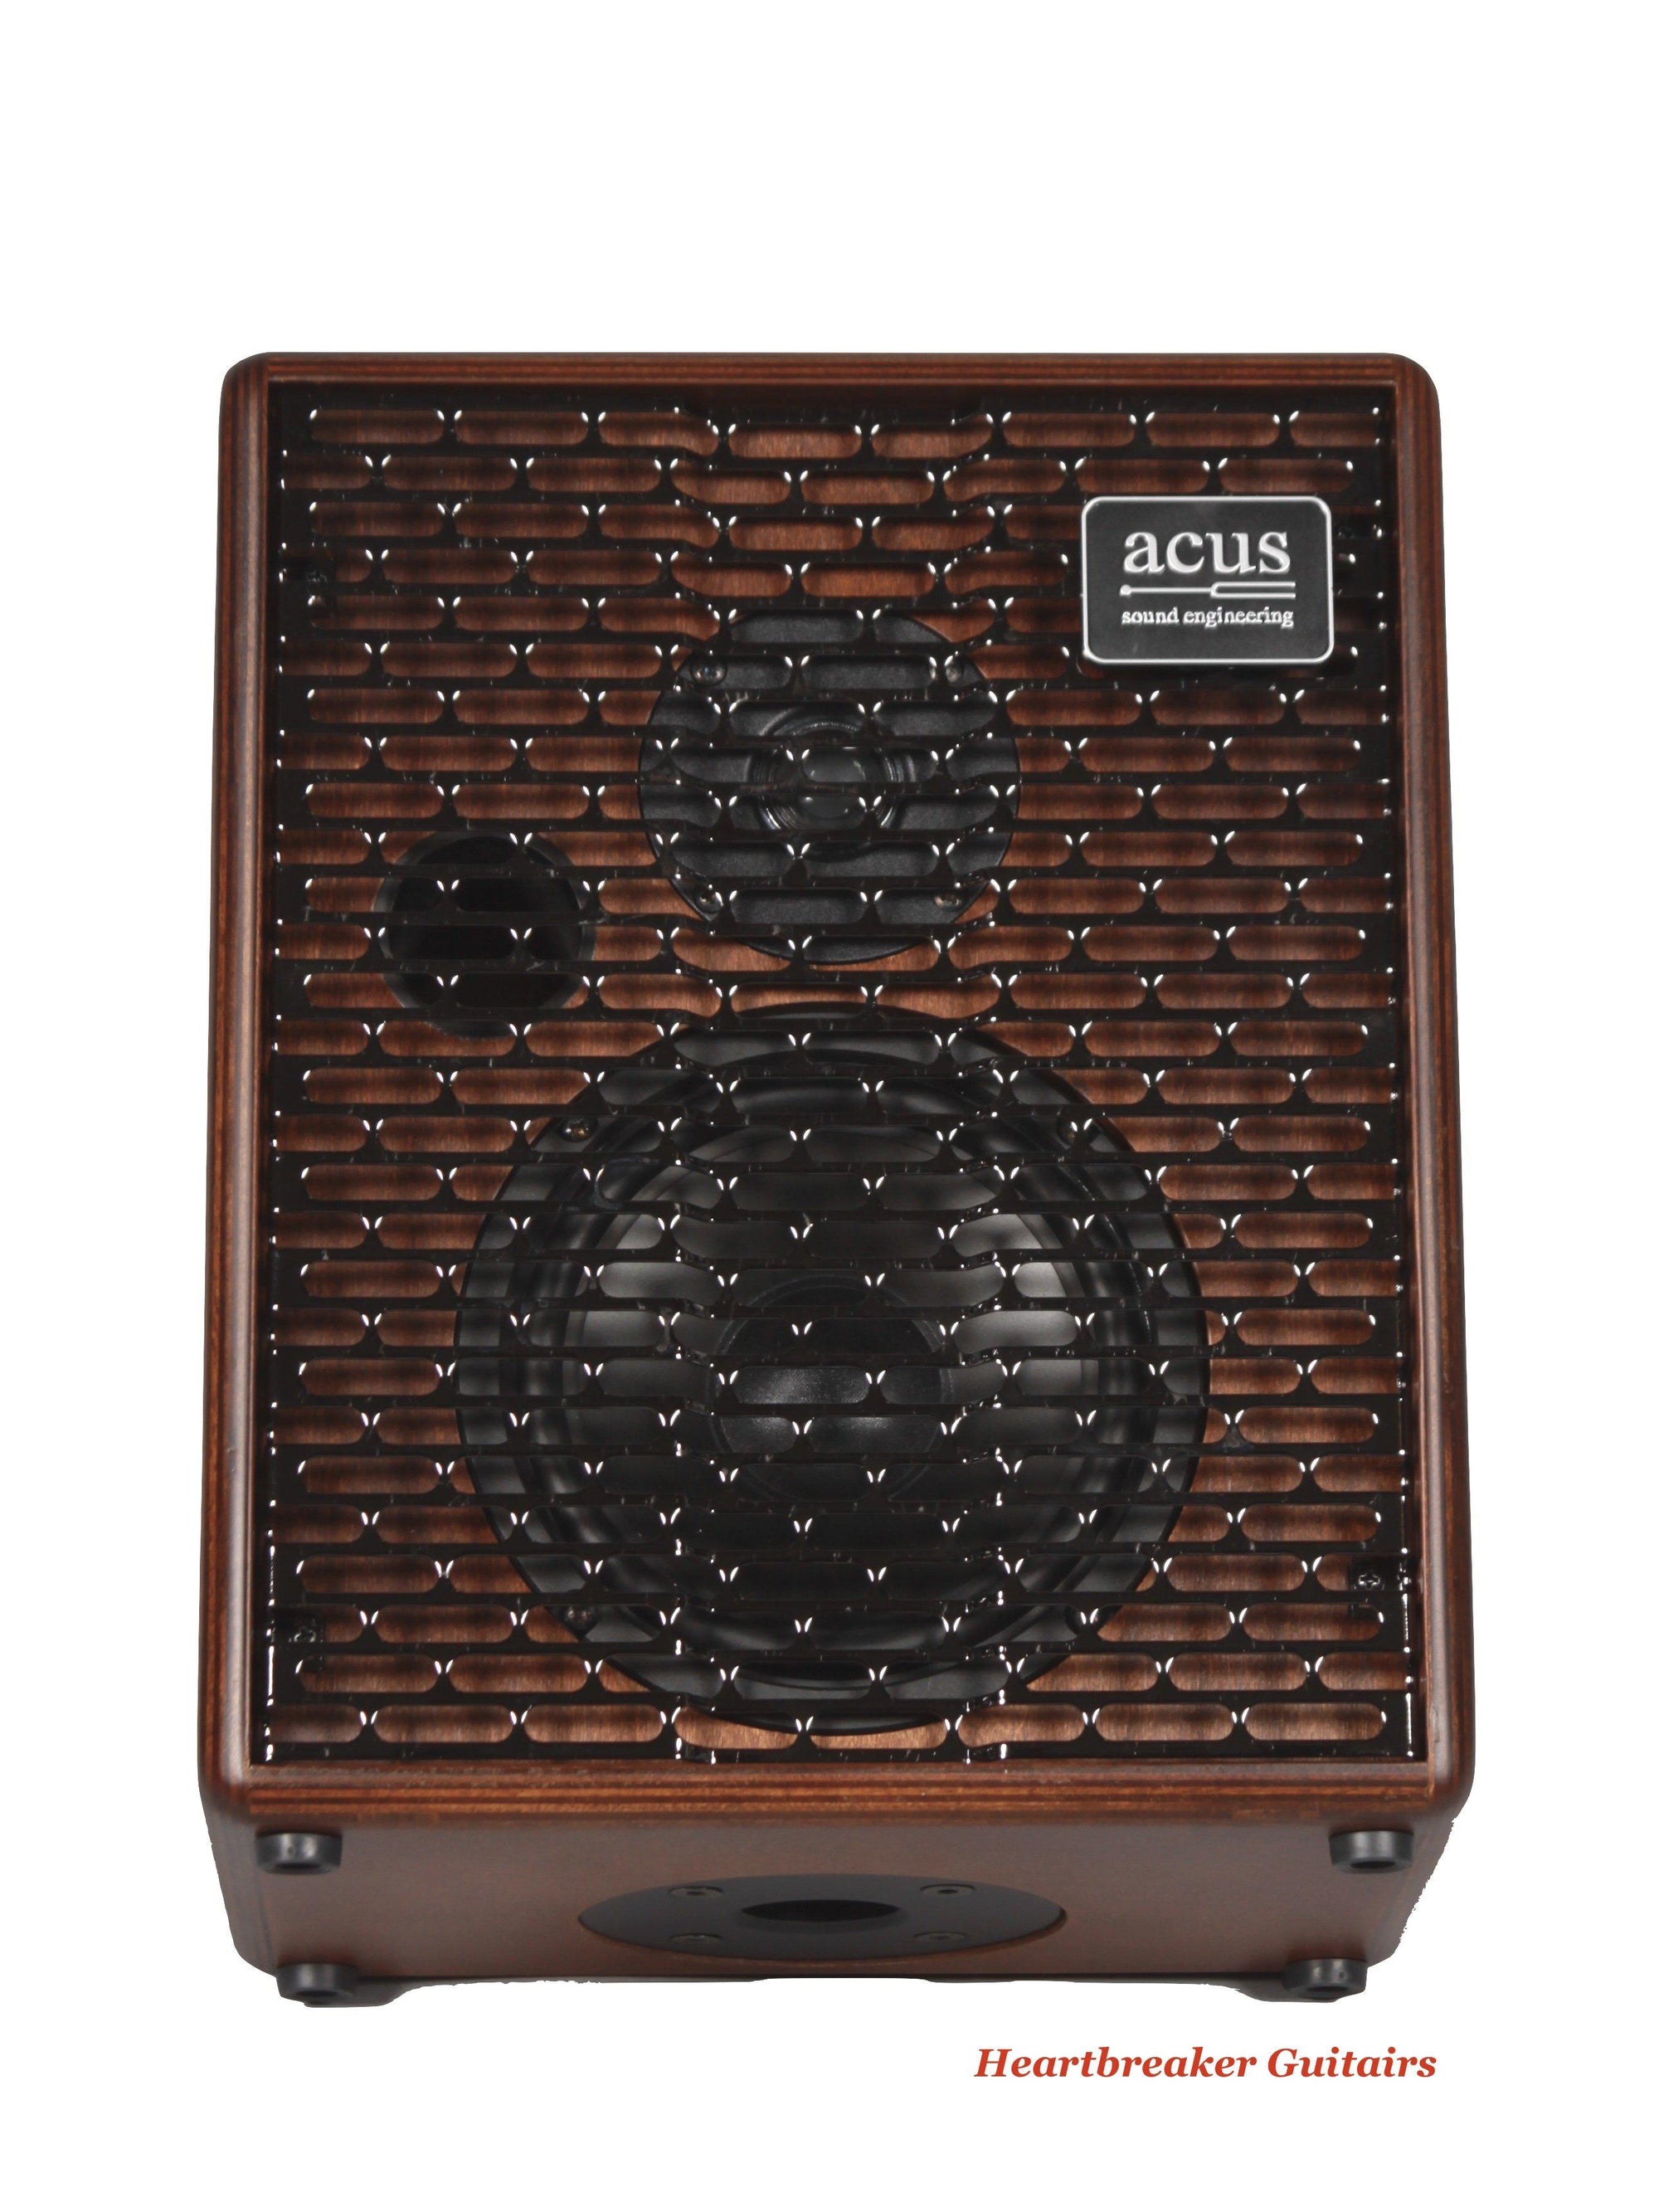 Acus Sound Engineering Acoustic Amp 6T - Heartbreaker Guitars - Heartbreaker Guitars